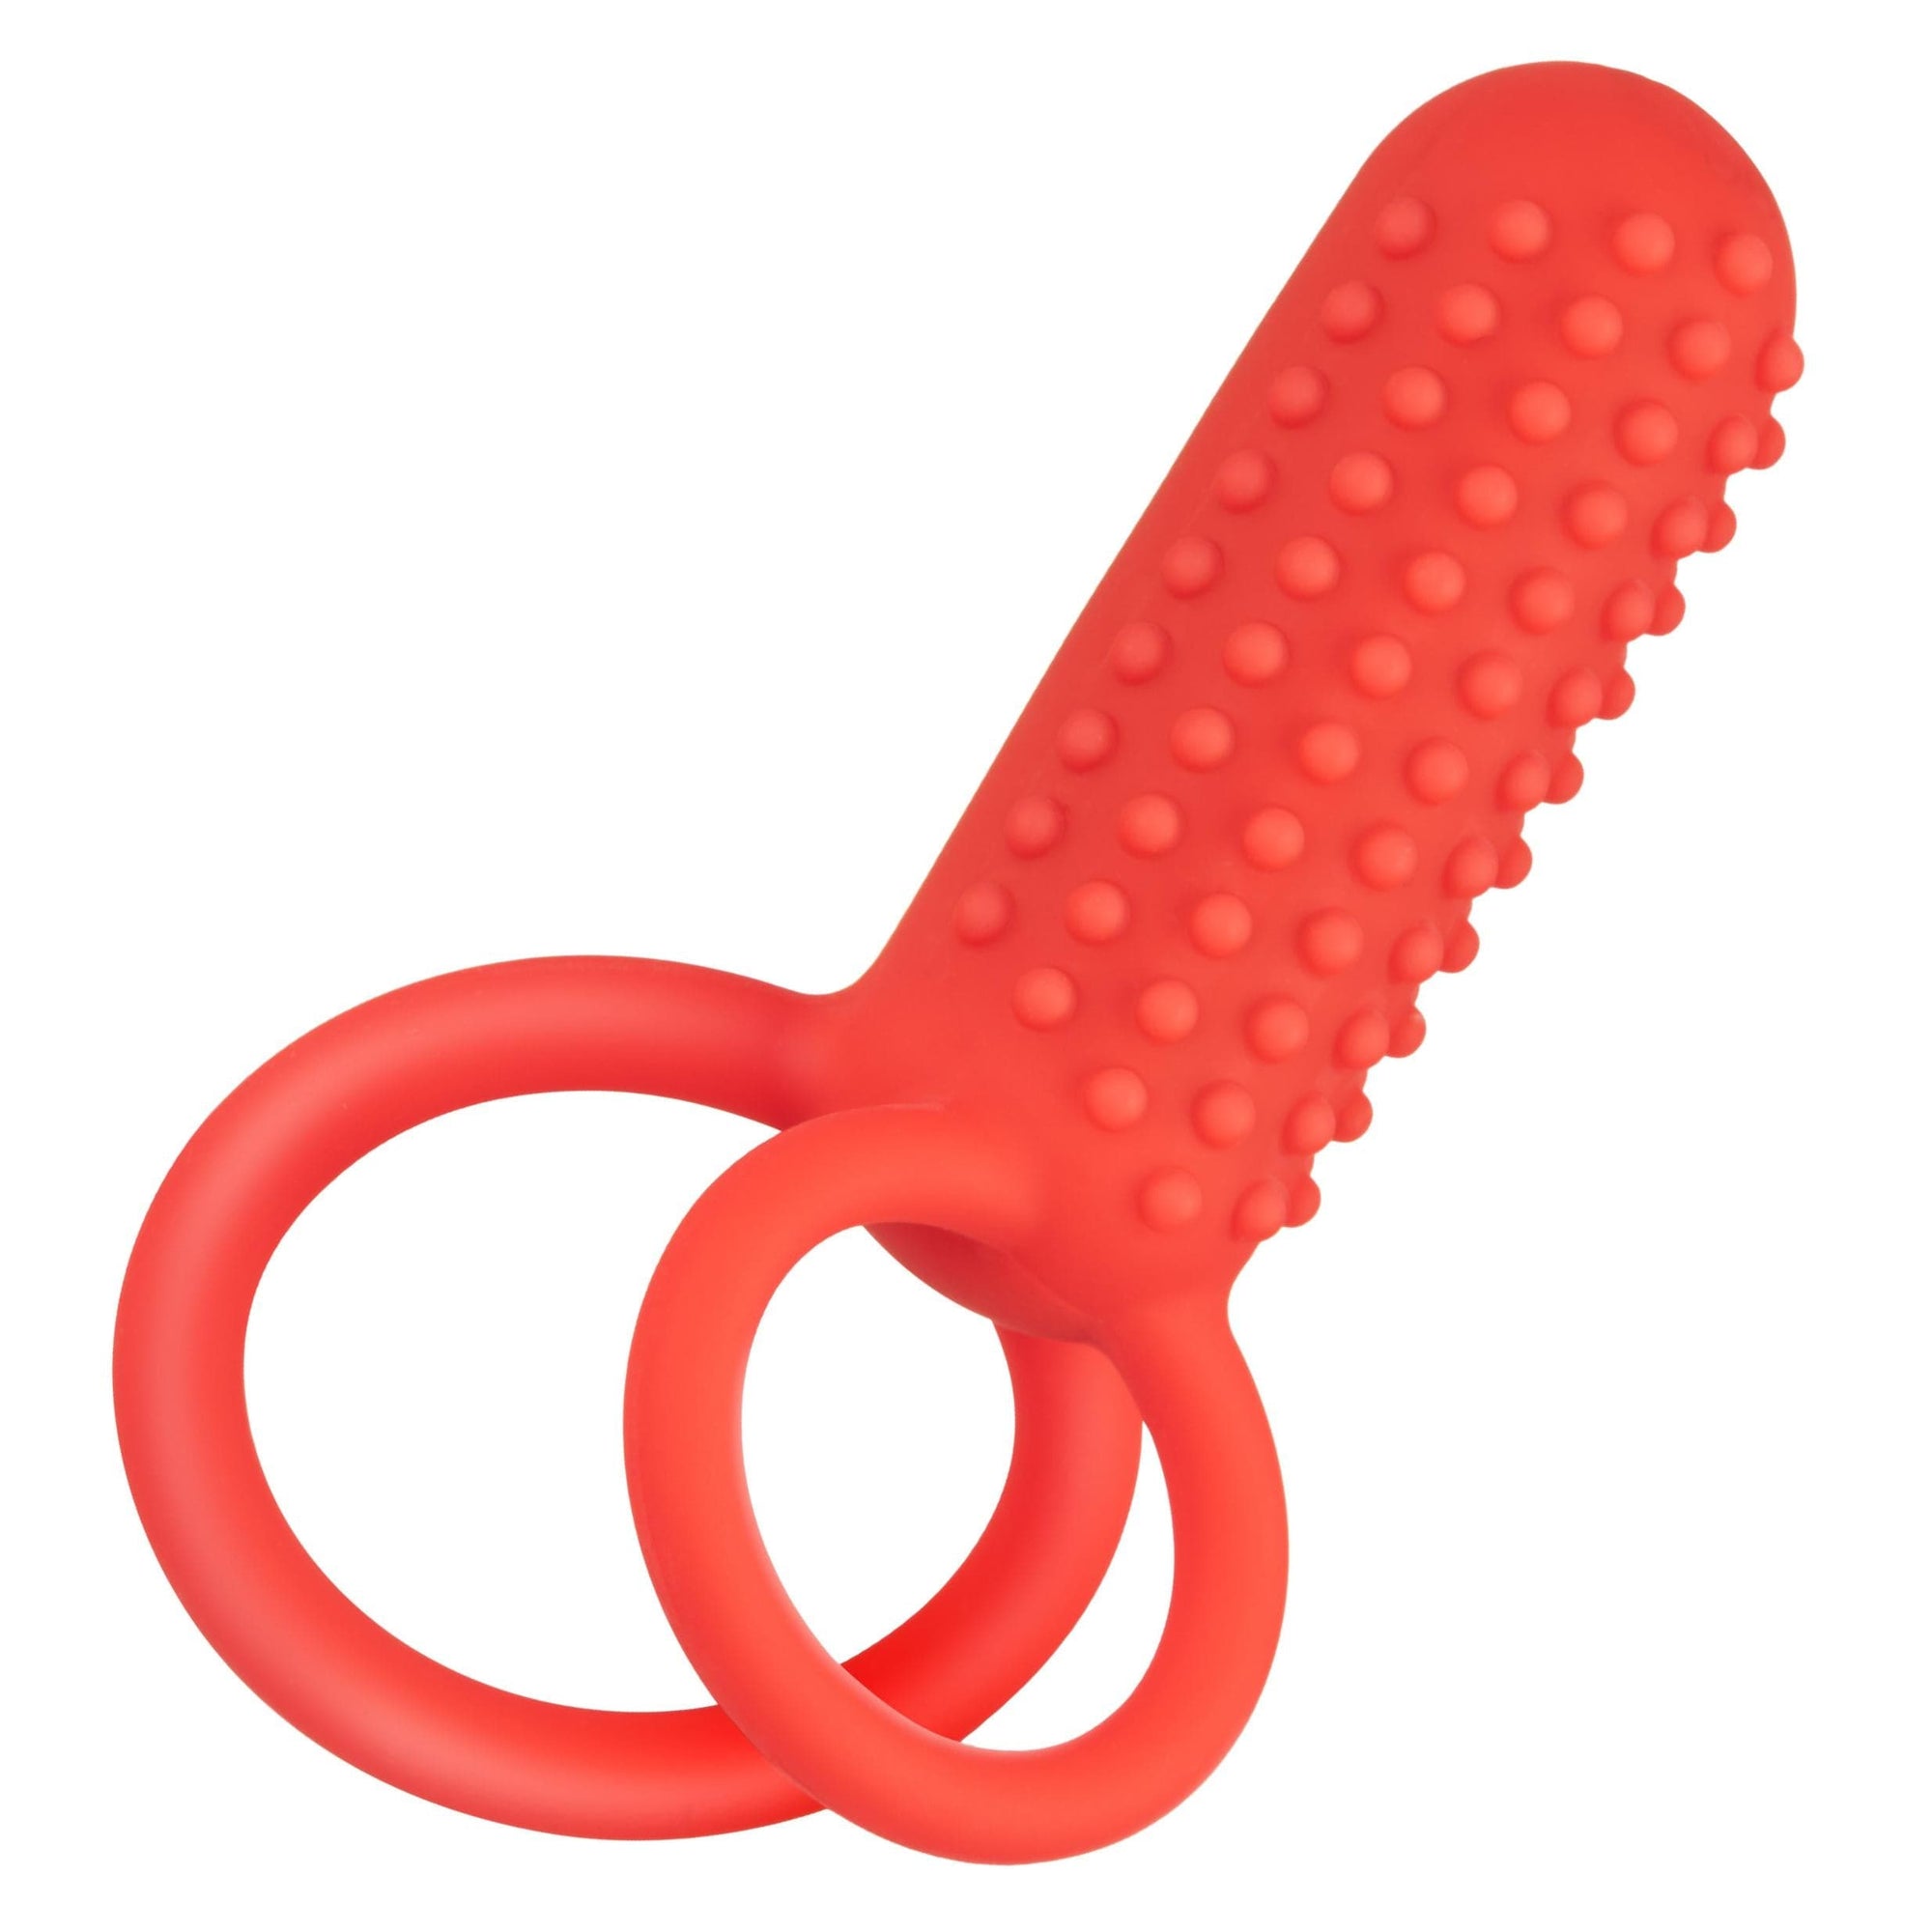 what is a penis ring for, how to use a penis ring